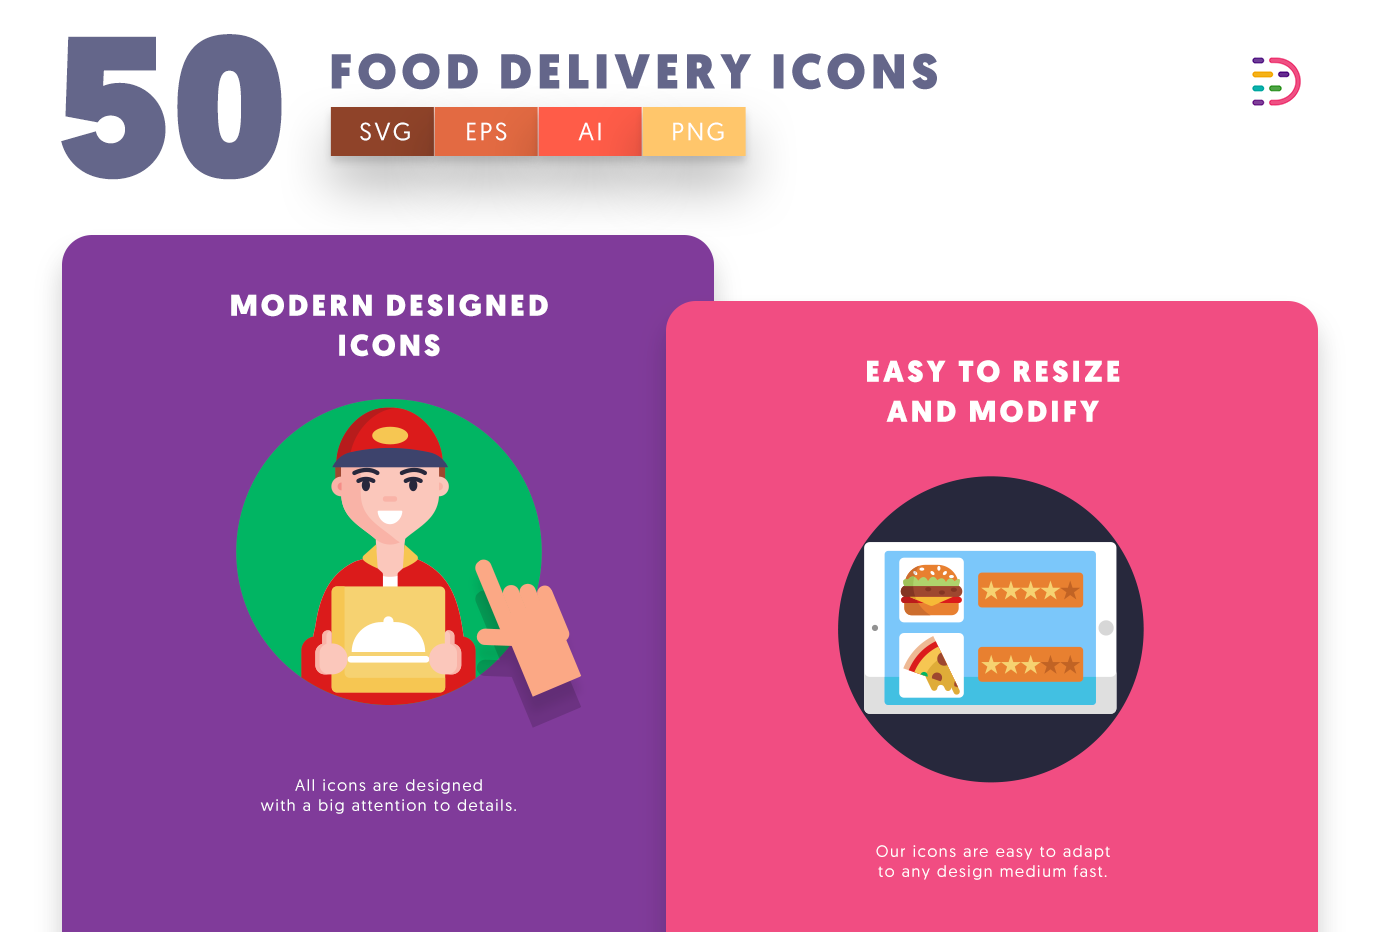 Food Delivery icons